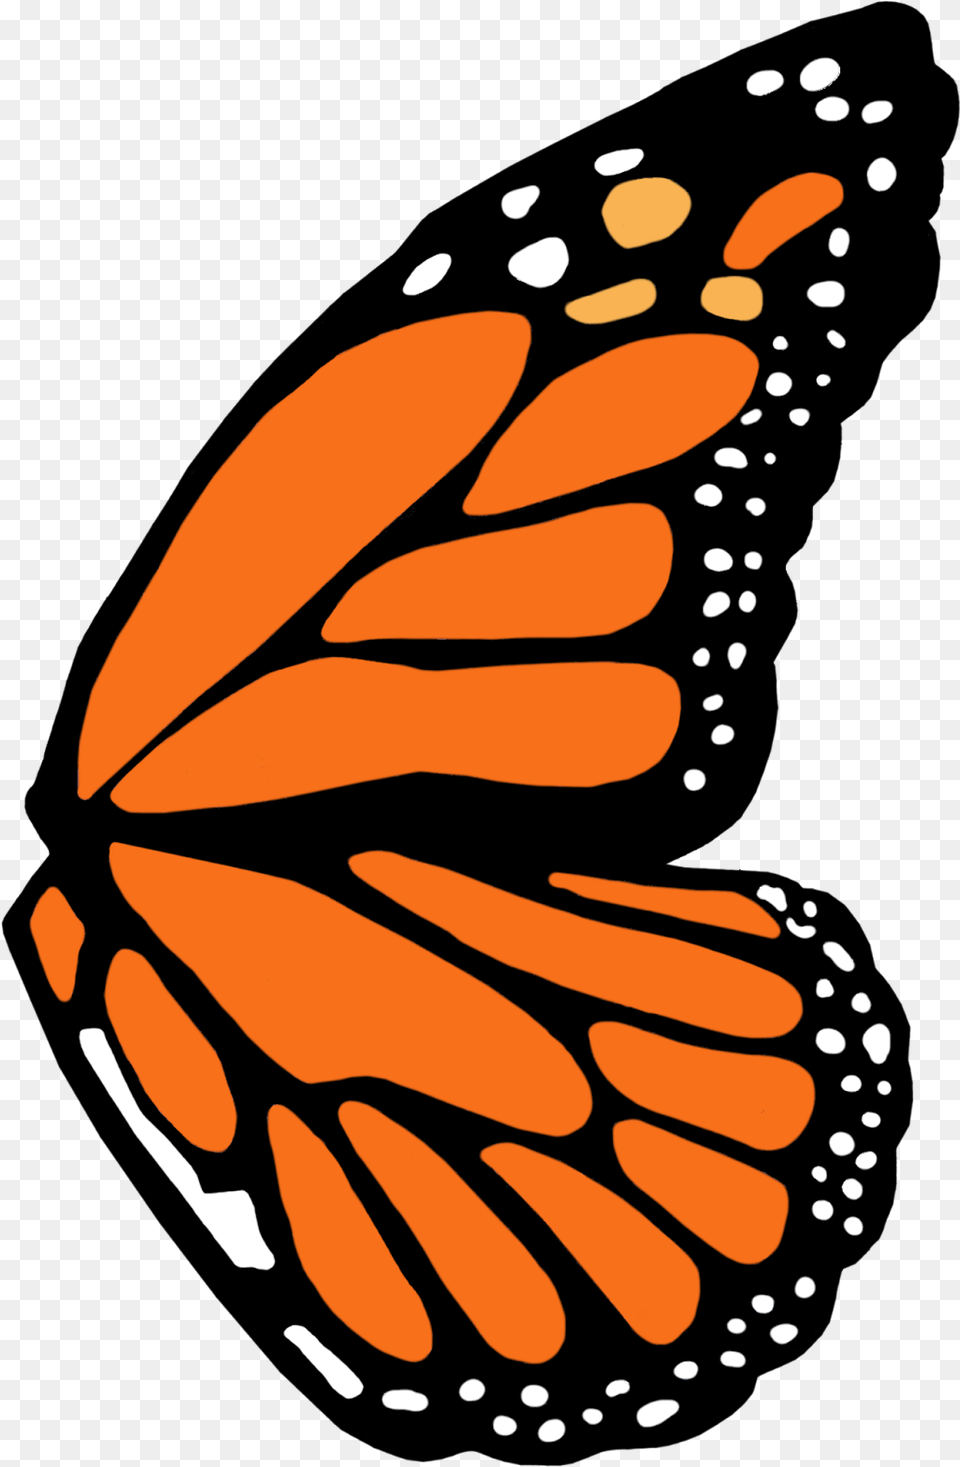 Full Left Monarch Butterfly Wing Template Monarch Butterfly Wing Template, Animal, Insect, Invertebrate Free Png